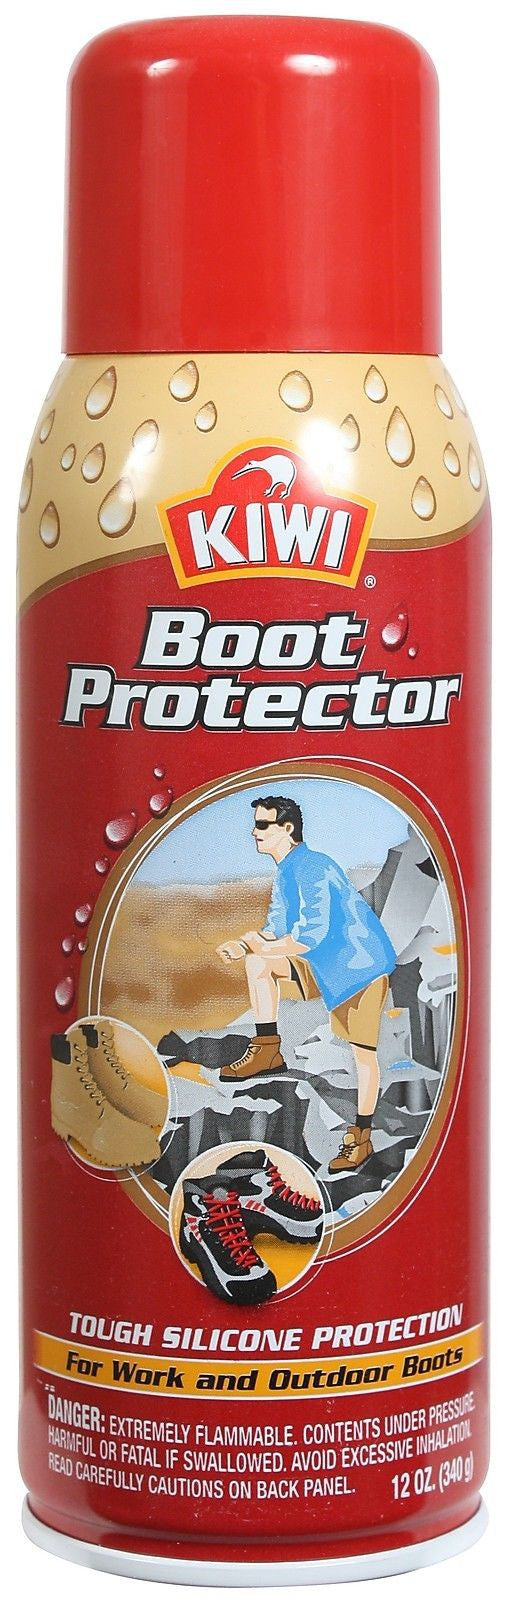 Kiwi Silicone Boot Protector - For Work & Outdoor Boots - 12 Oz Bottle